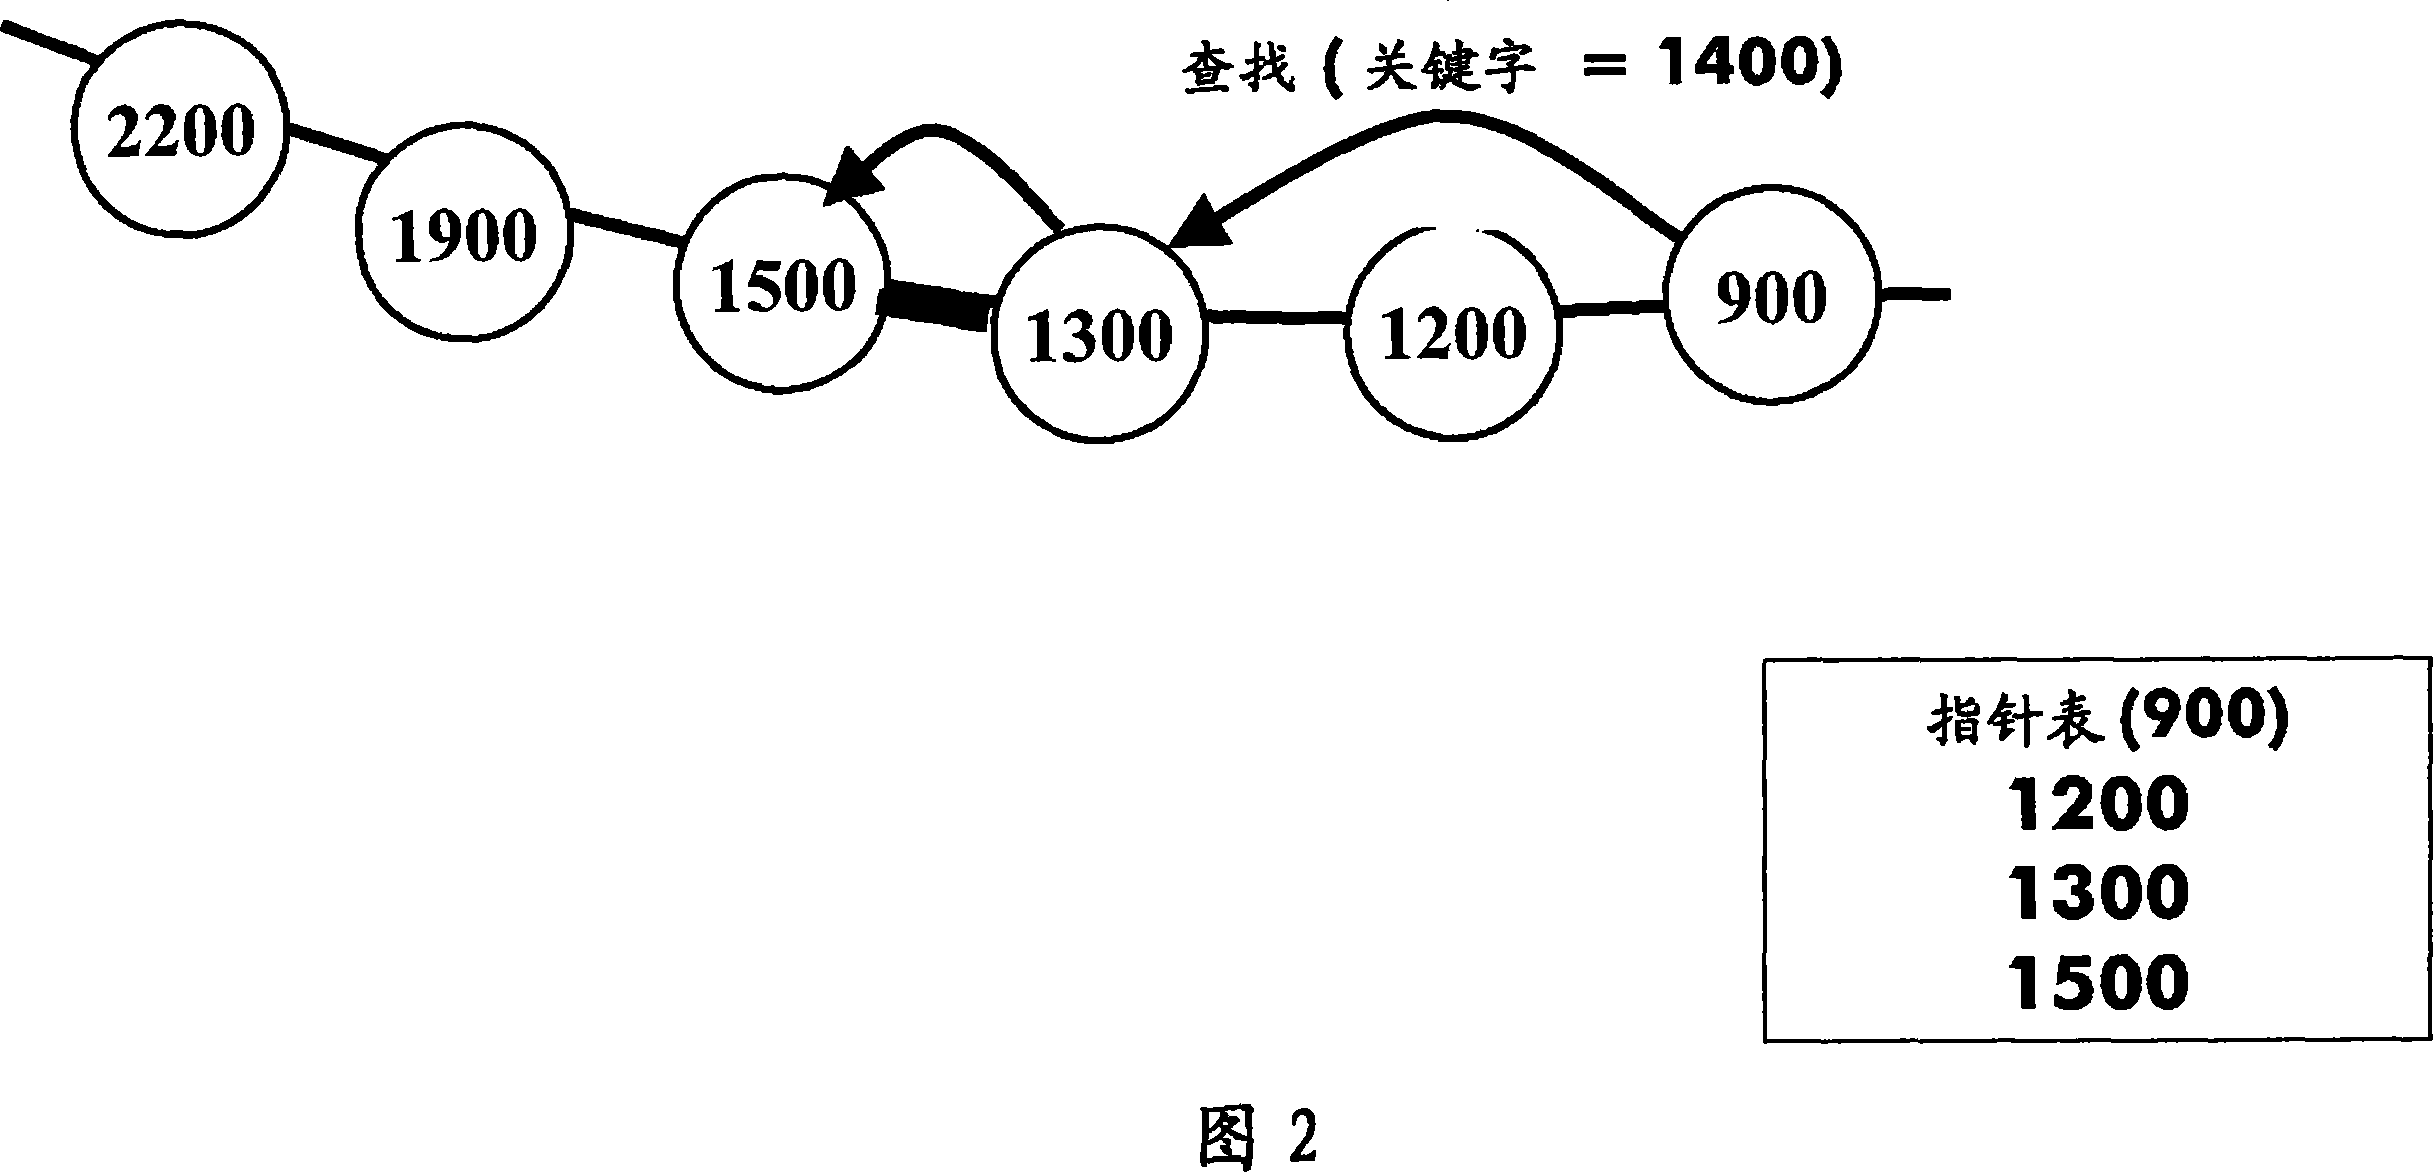 Distributed hashing mechanism for self-organizing networks